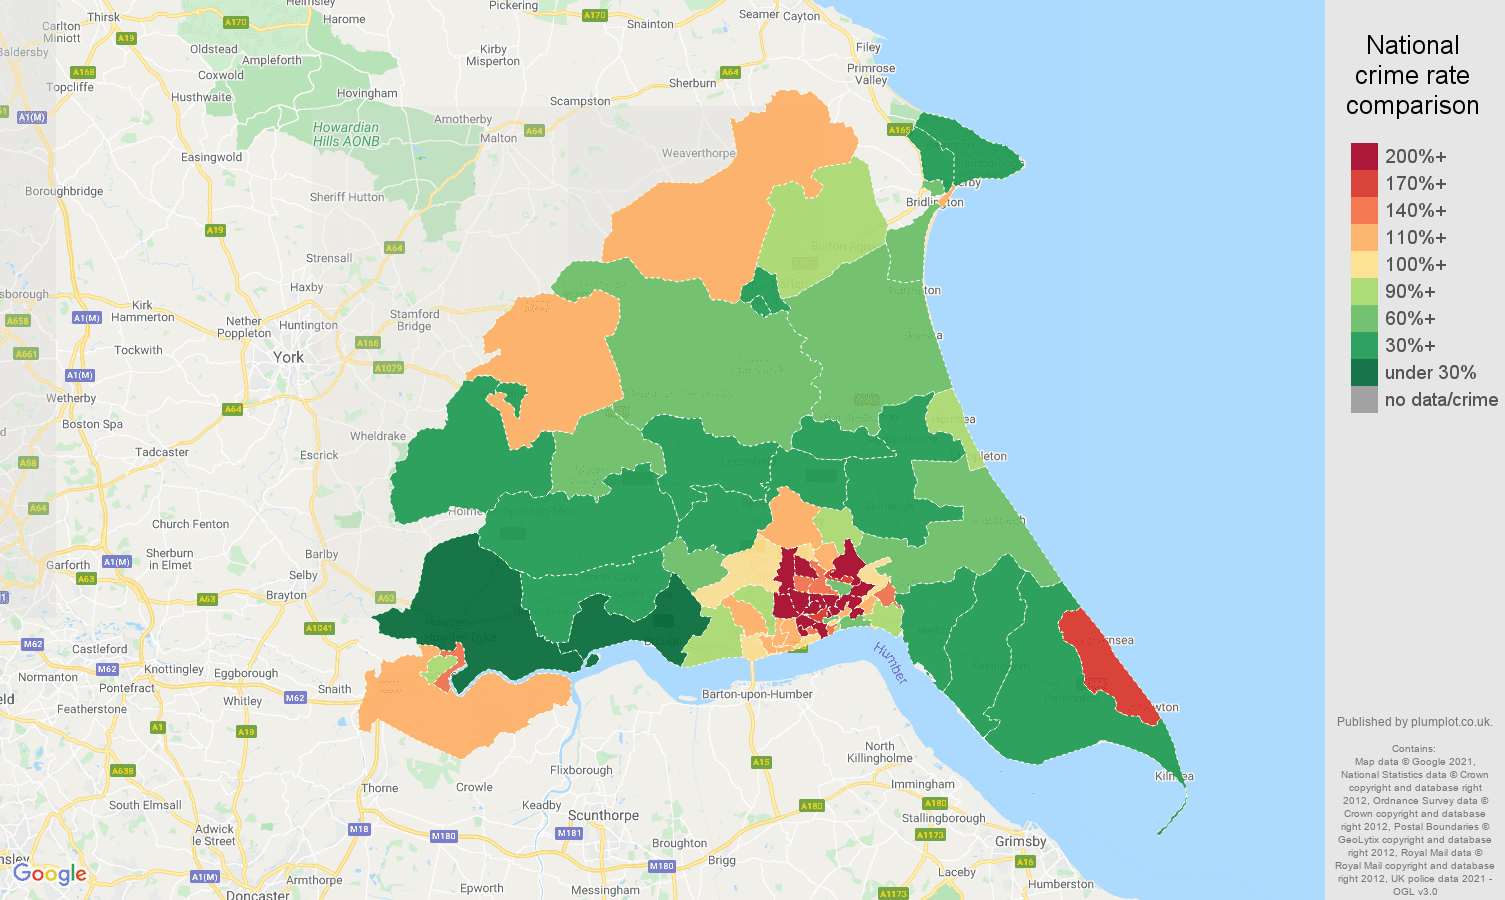 East Riding of Yorkshire burglary crime rate comparison map